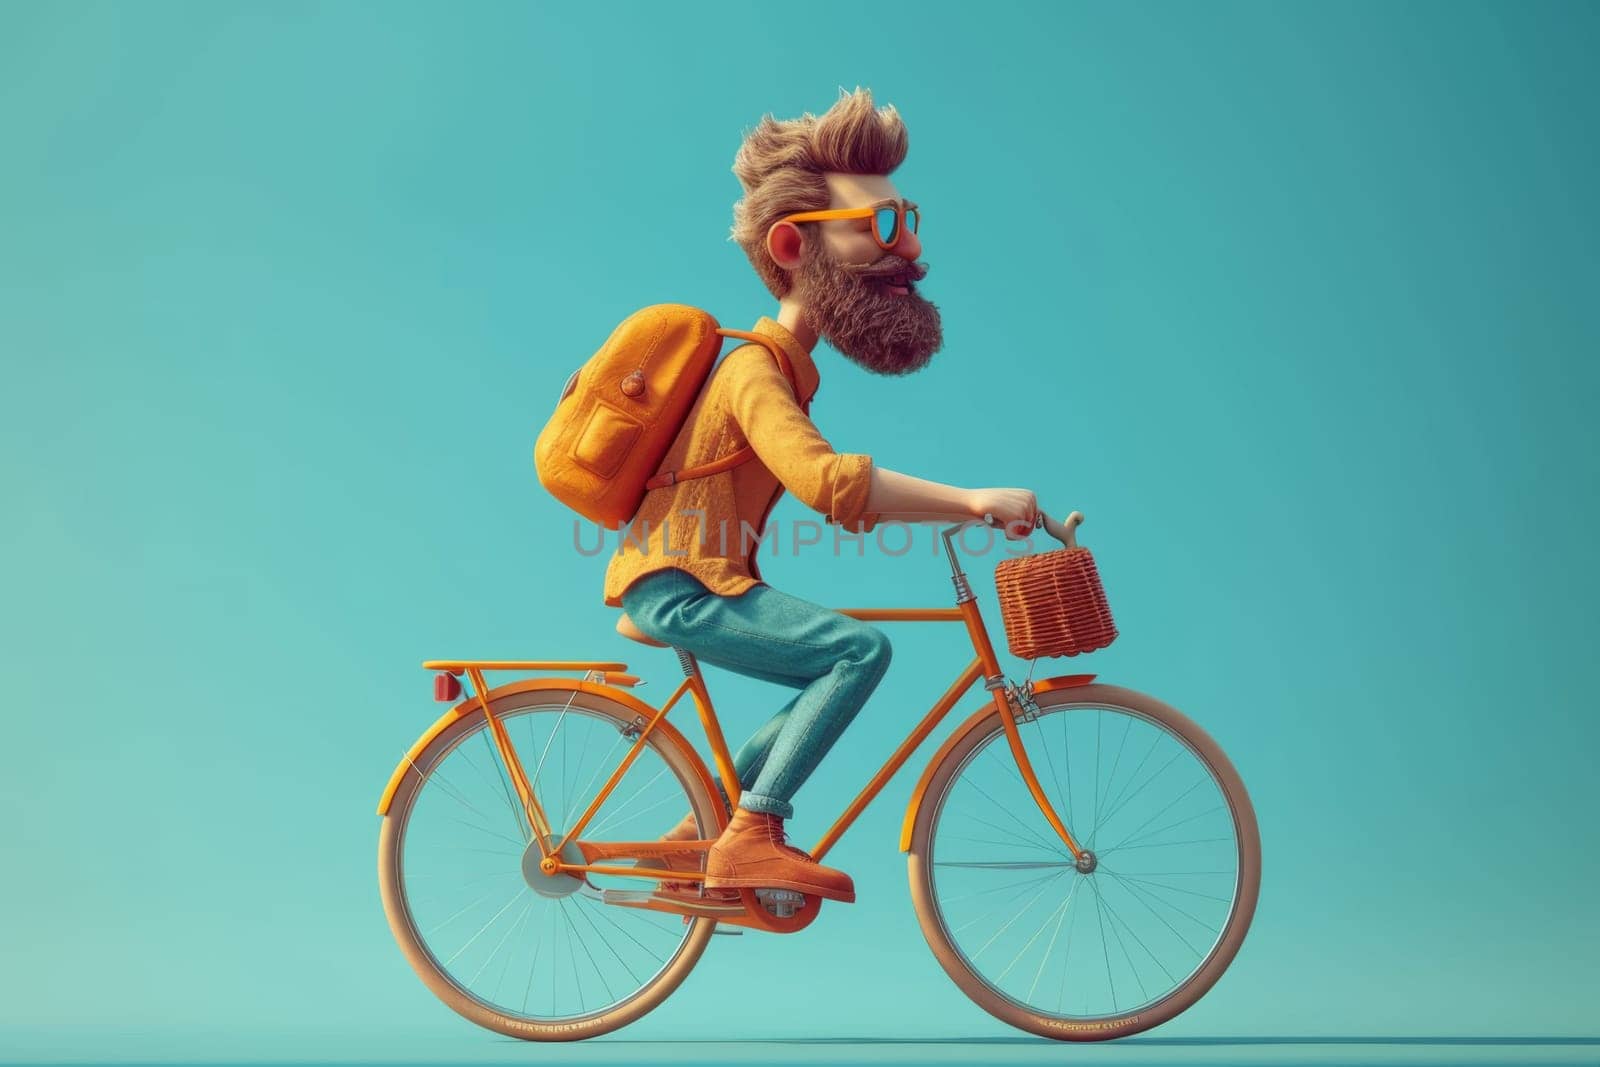 The cartoon character is a backpacker on a blue background riding a bicycle. 3d illustration.